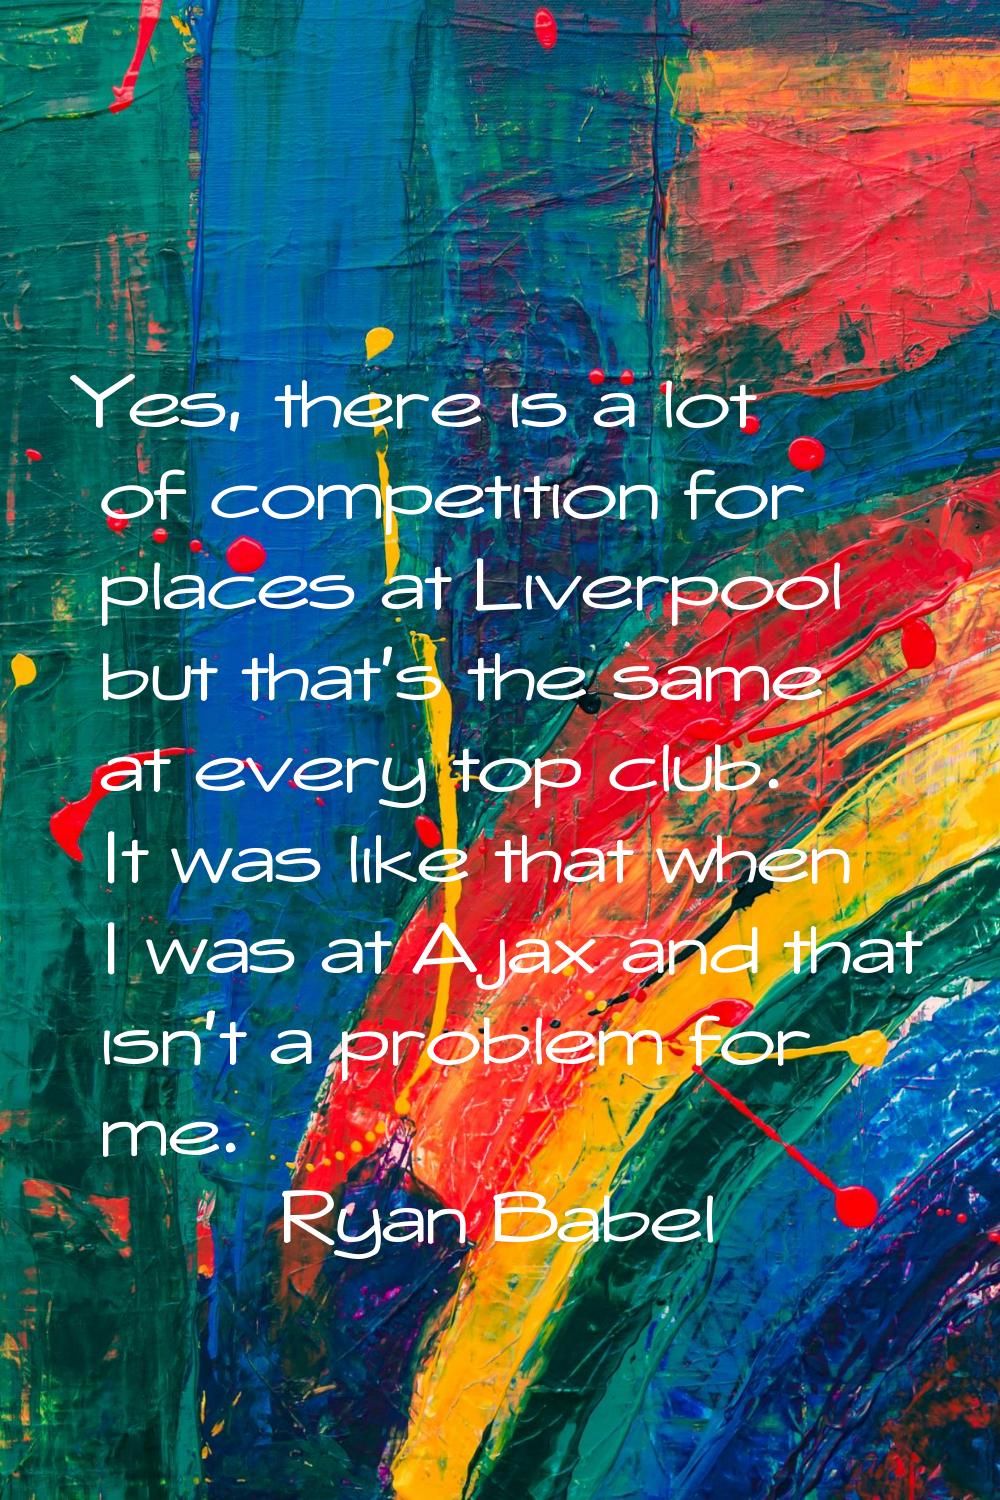 Yes, there is a lot of competition for places at Liverpool but that's the same at every top club. I